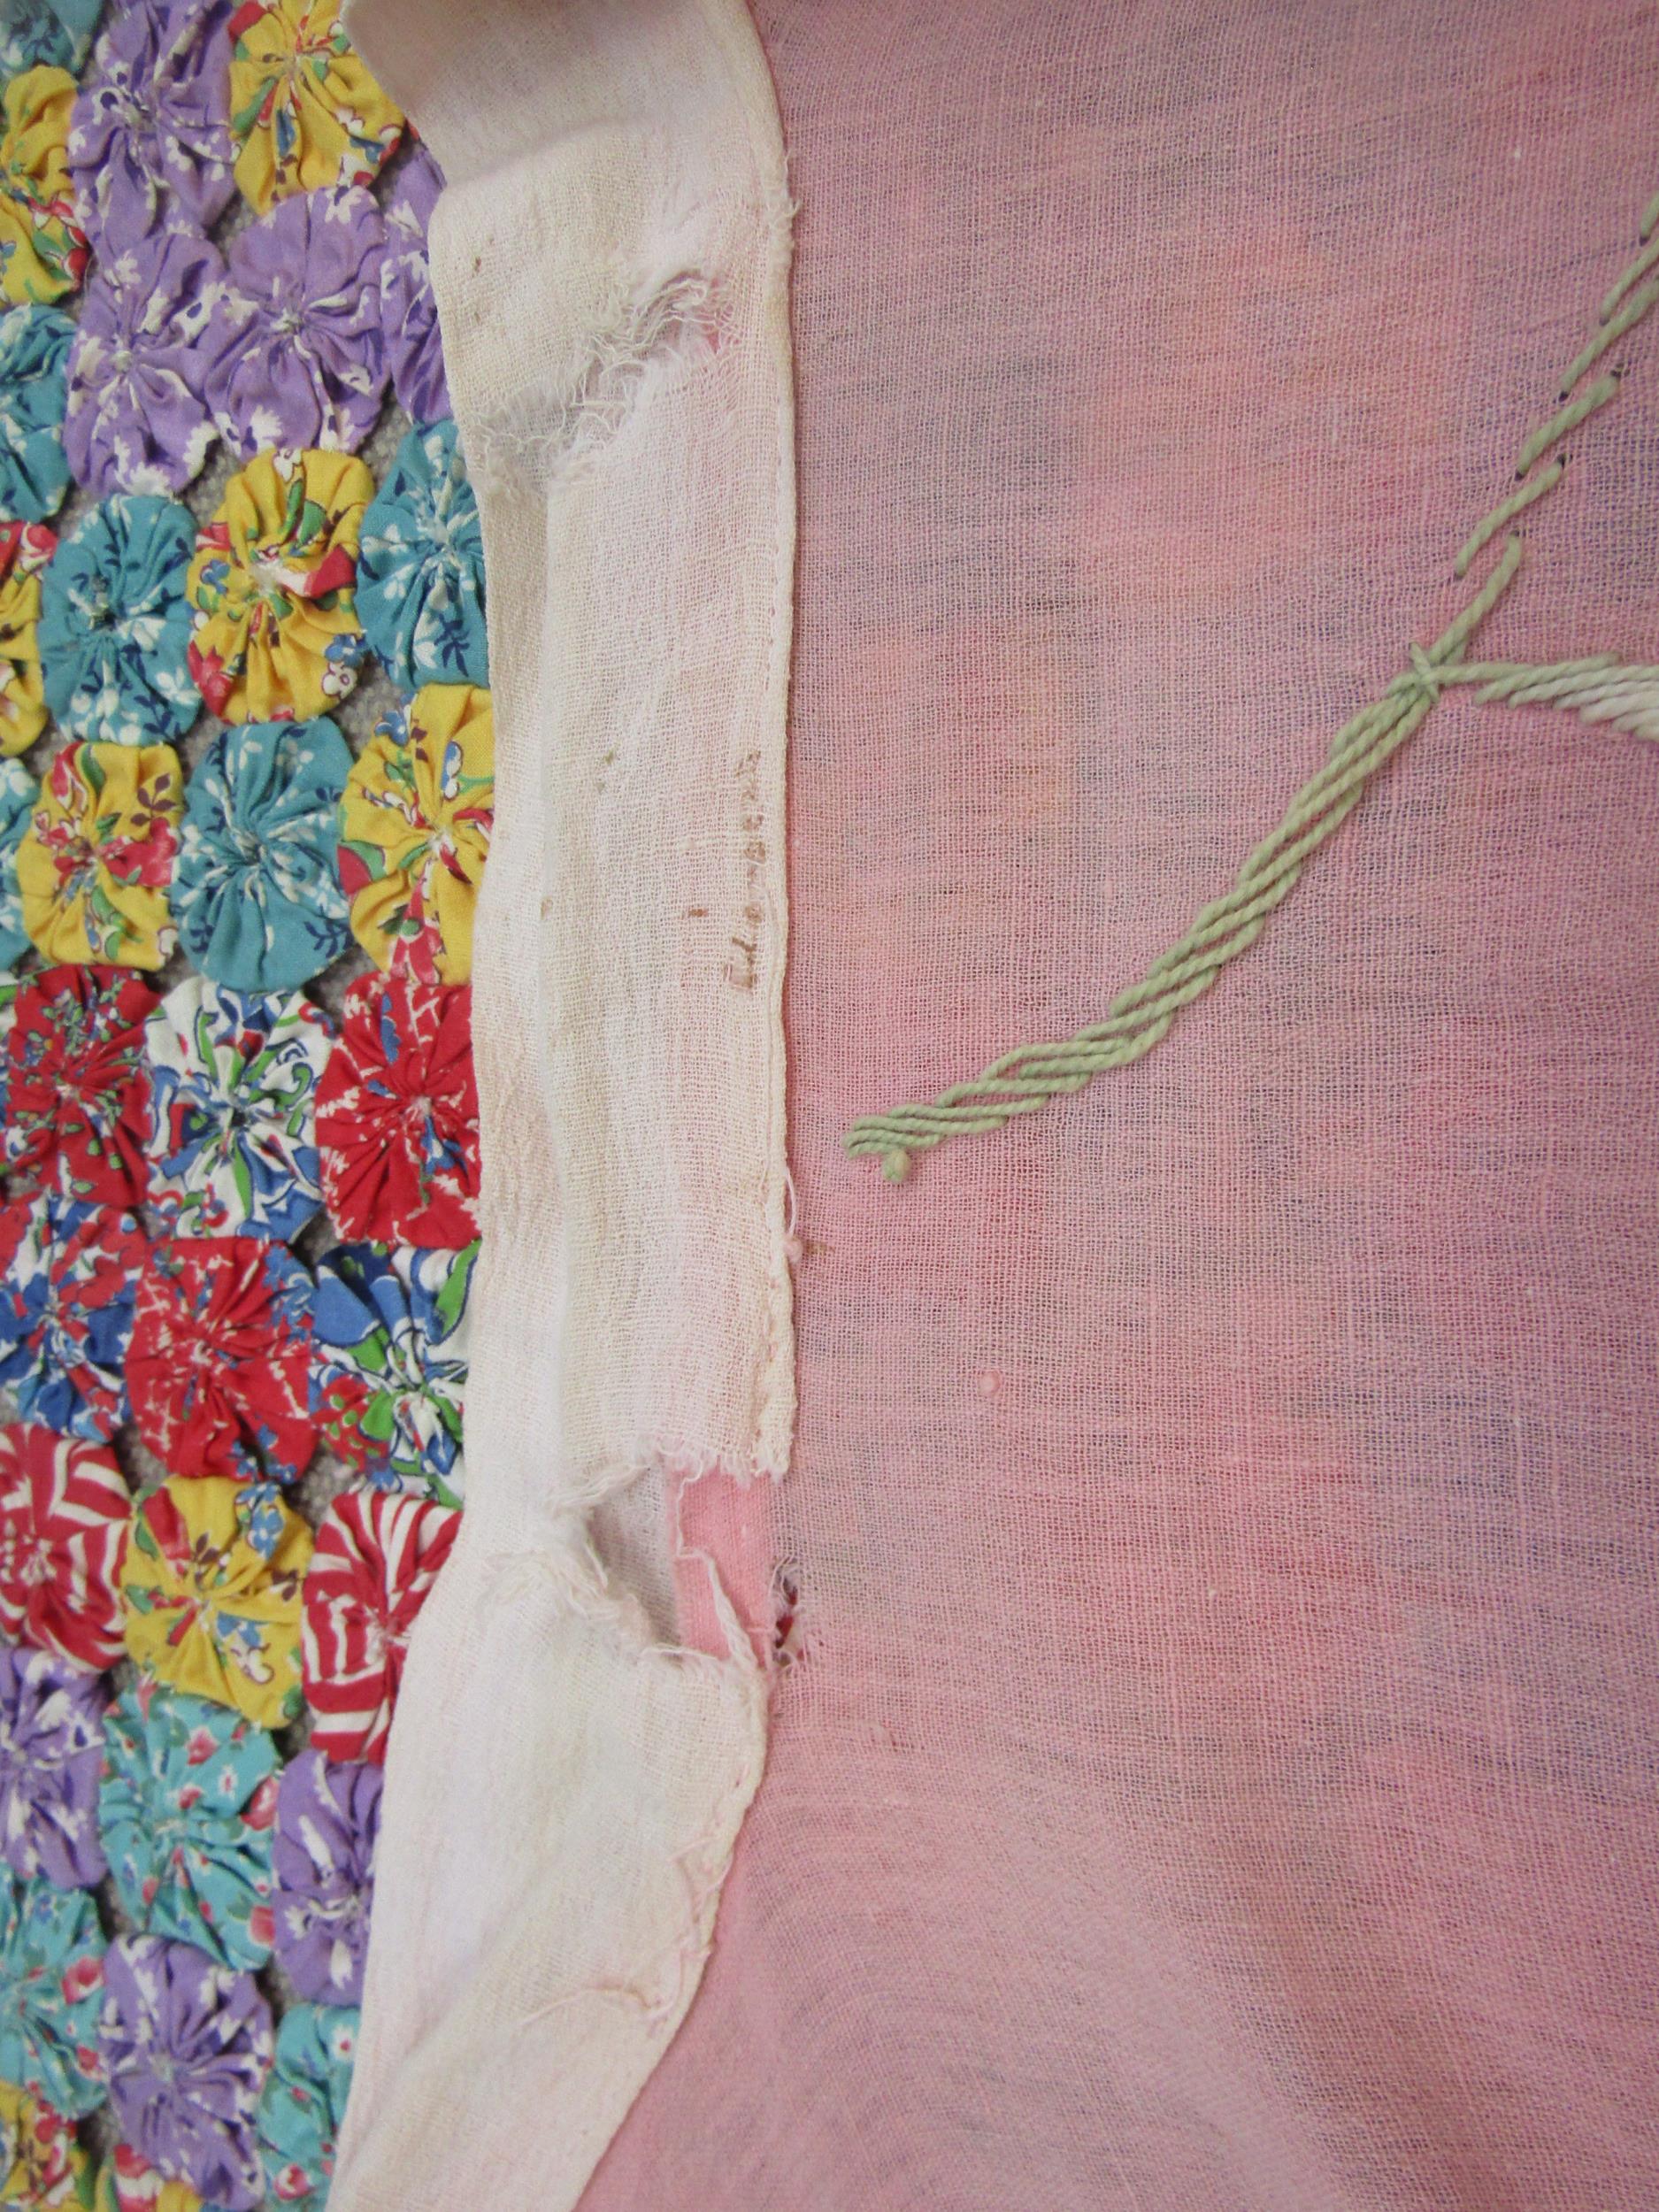 Two early 20th Century kimono style dressing gowns in pink, with hand embroidered floral detail - Image 3 of 4